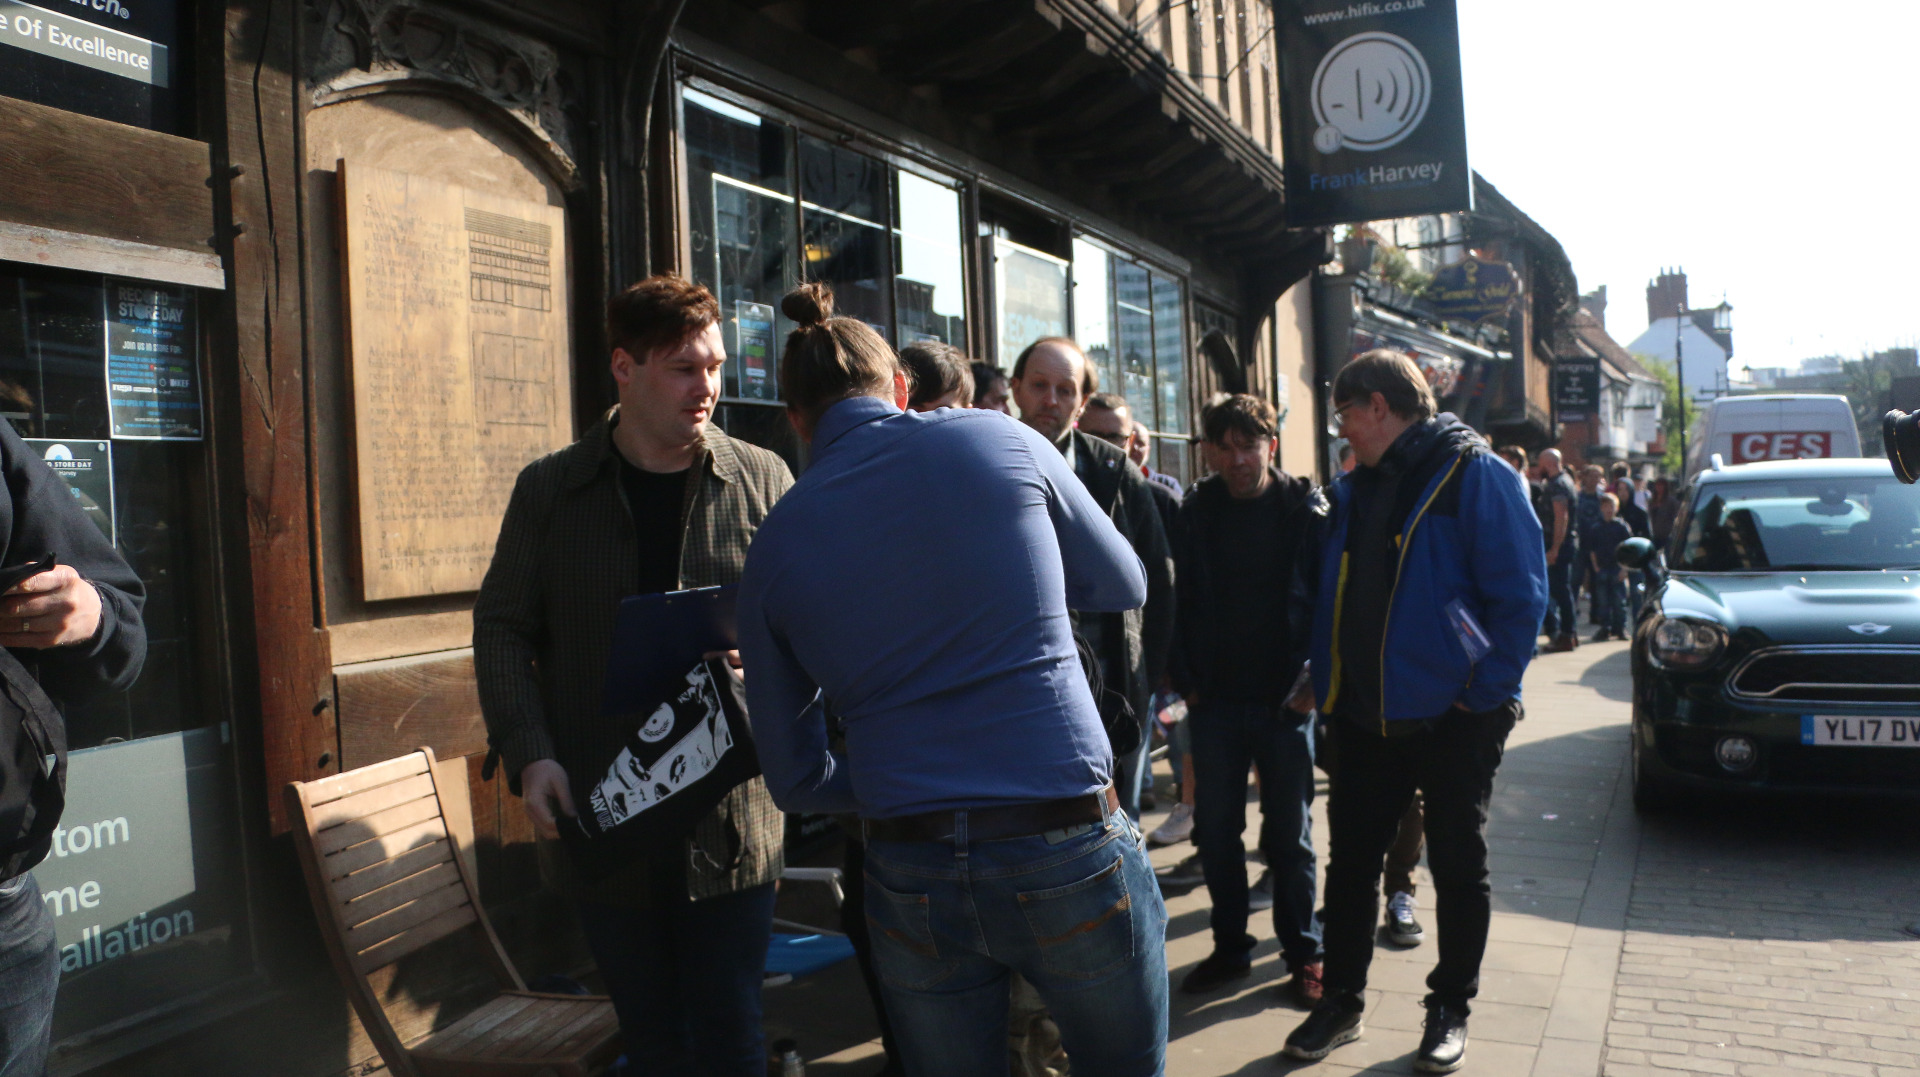 People gathered outside Hifix talking about the new record store day album releases